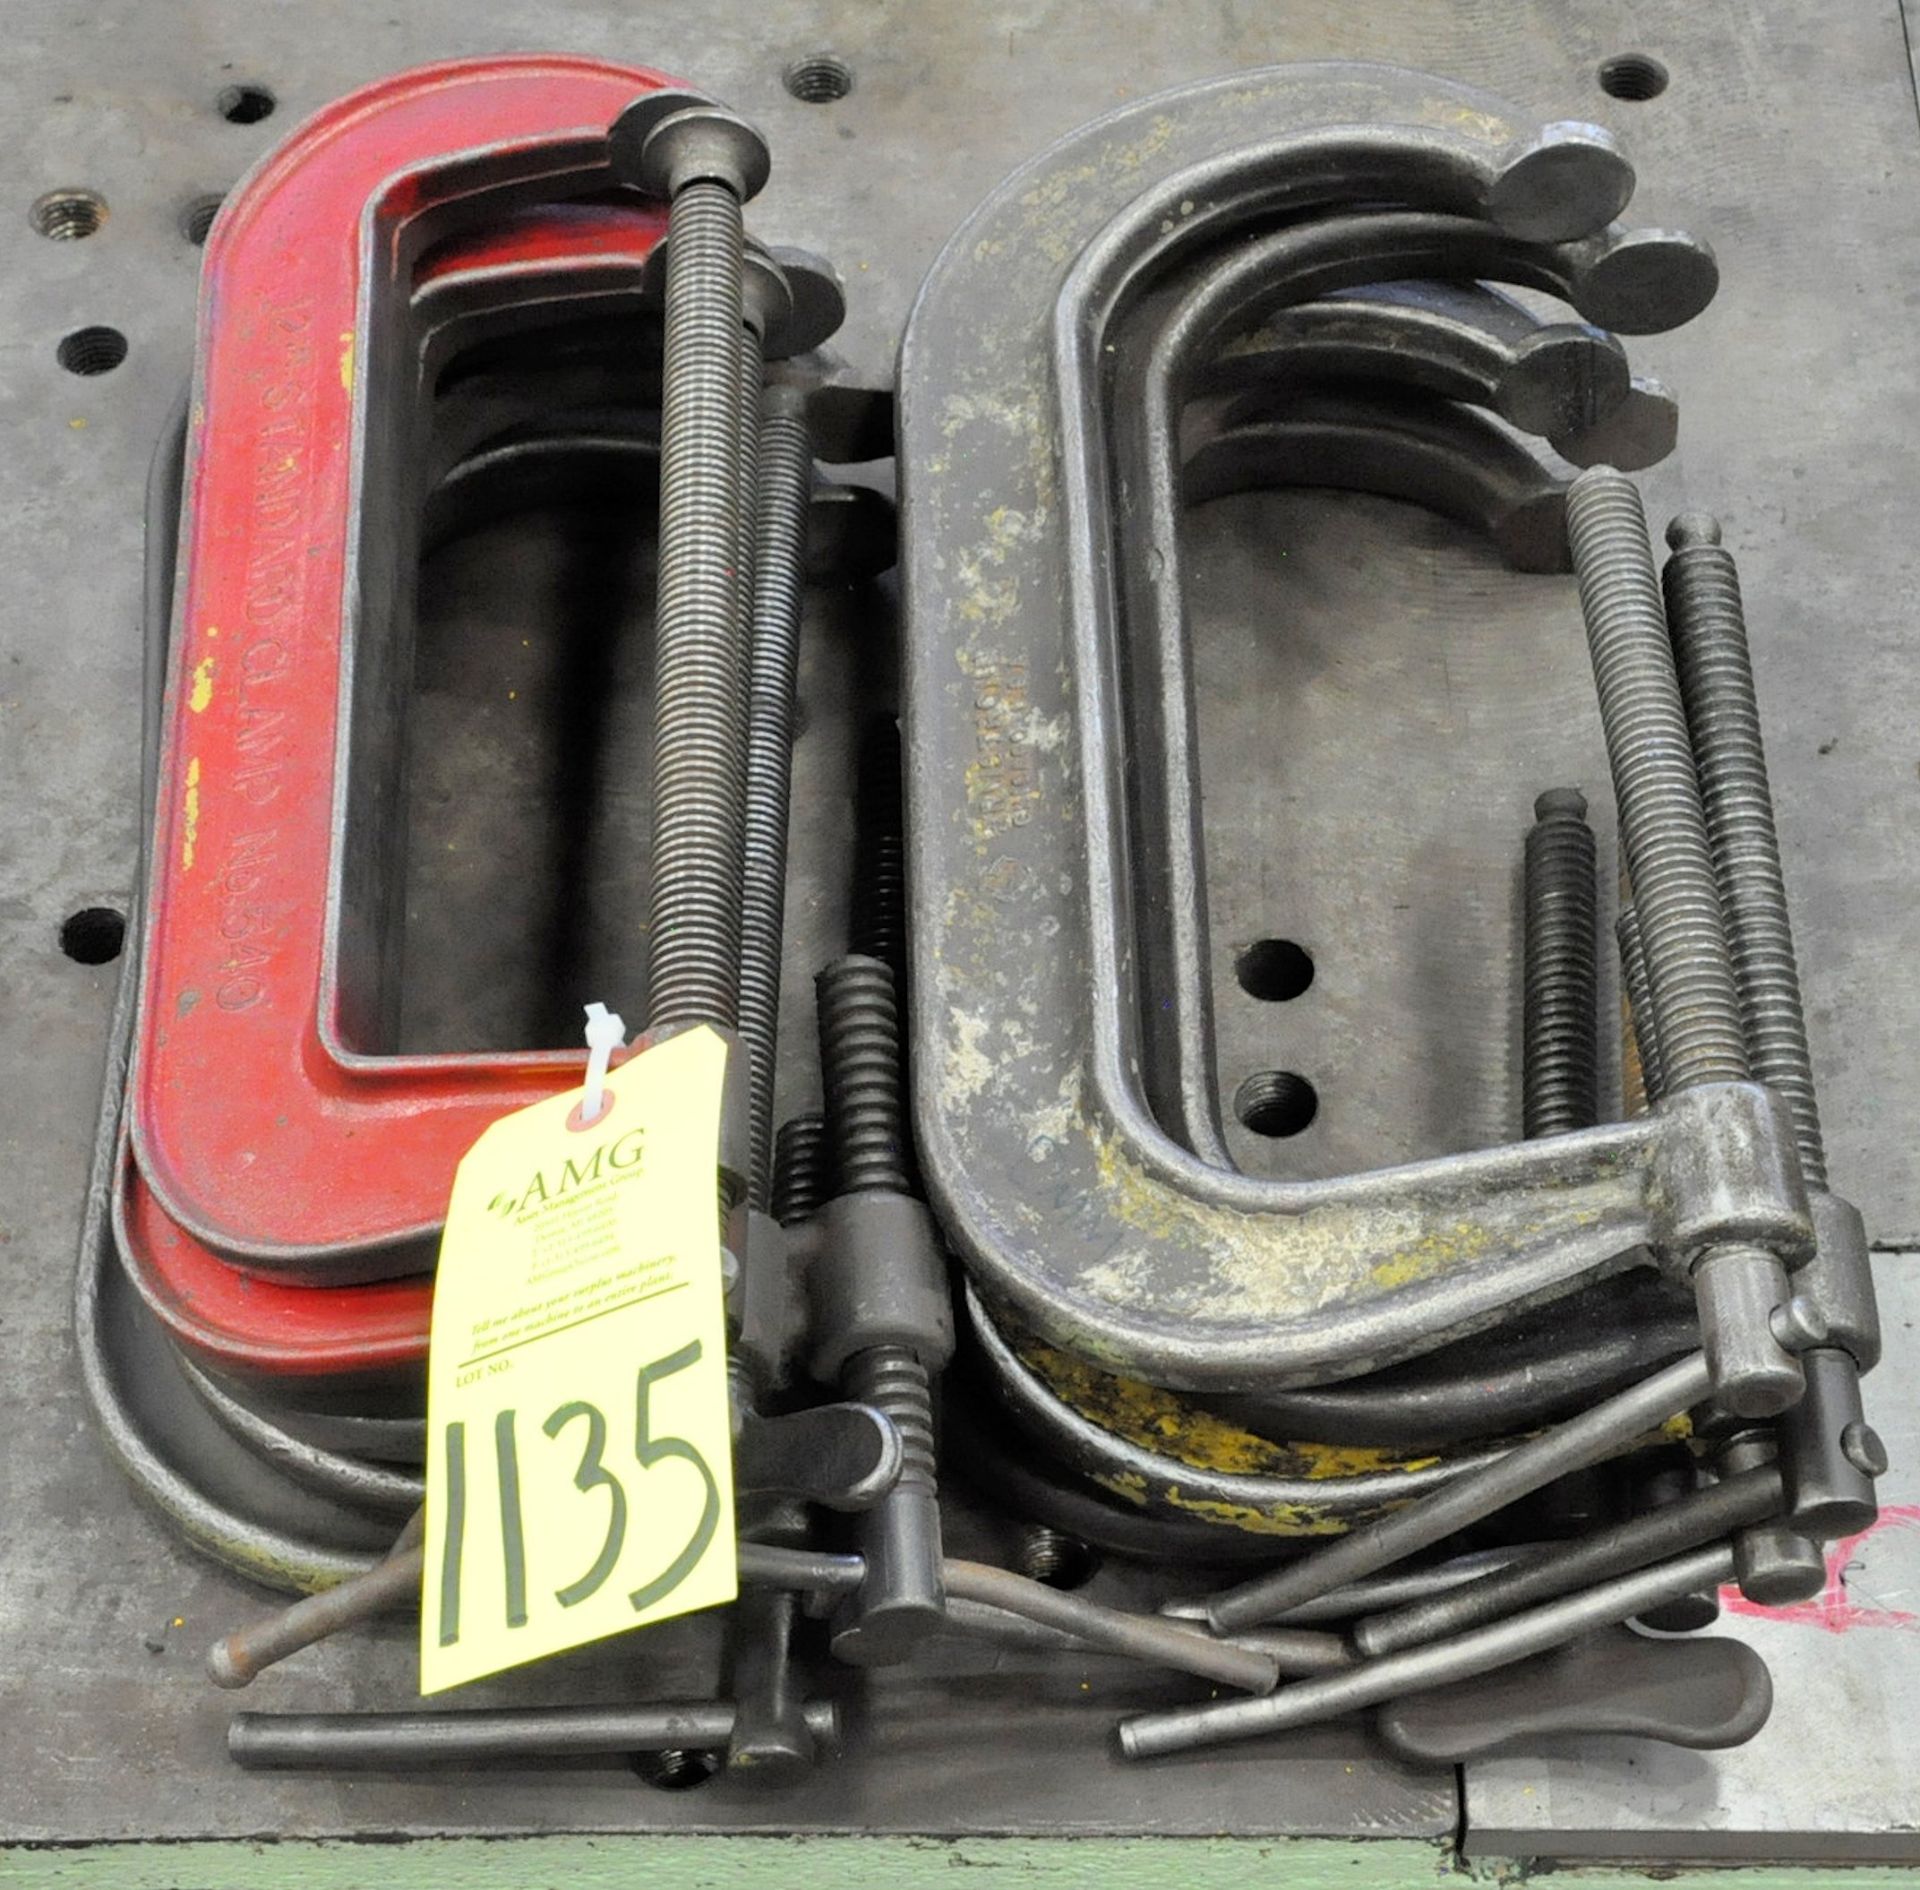 Lot-12" C-Clamps in (2) Stacks, (G-15), (Yellow Tag)